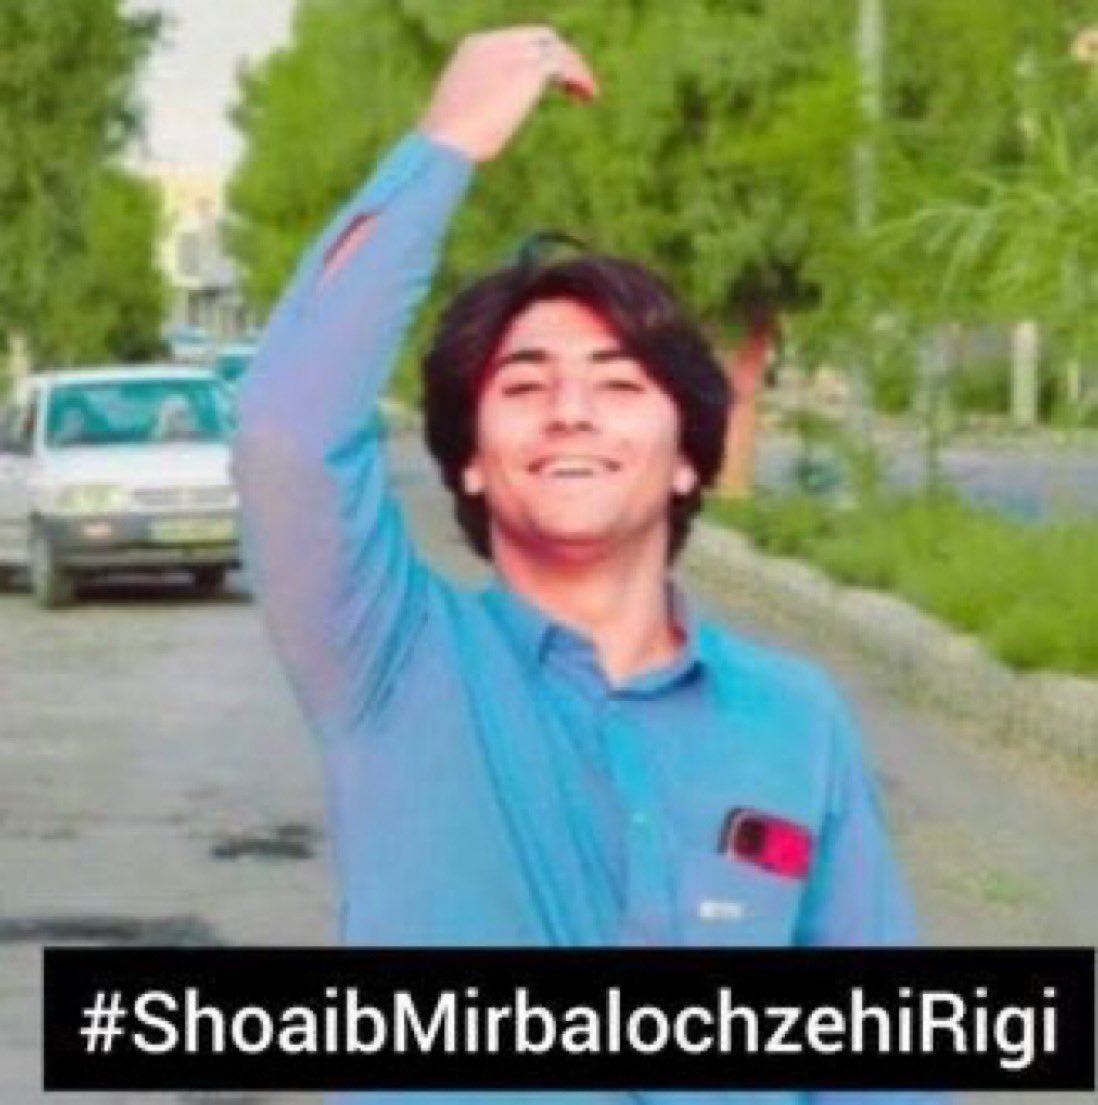 #ShoaibMirbalochzehiRigi 18 yo Baloch protester who is sentenced to death, is under torture to confess to false accusations that ‘he was the leader of protesters and cooperated with armed groups
#IRGCterrorists